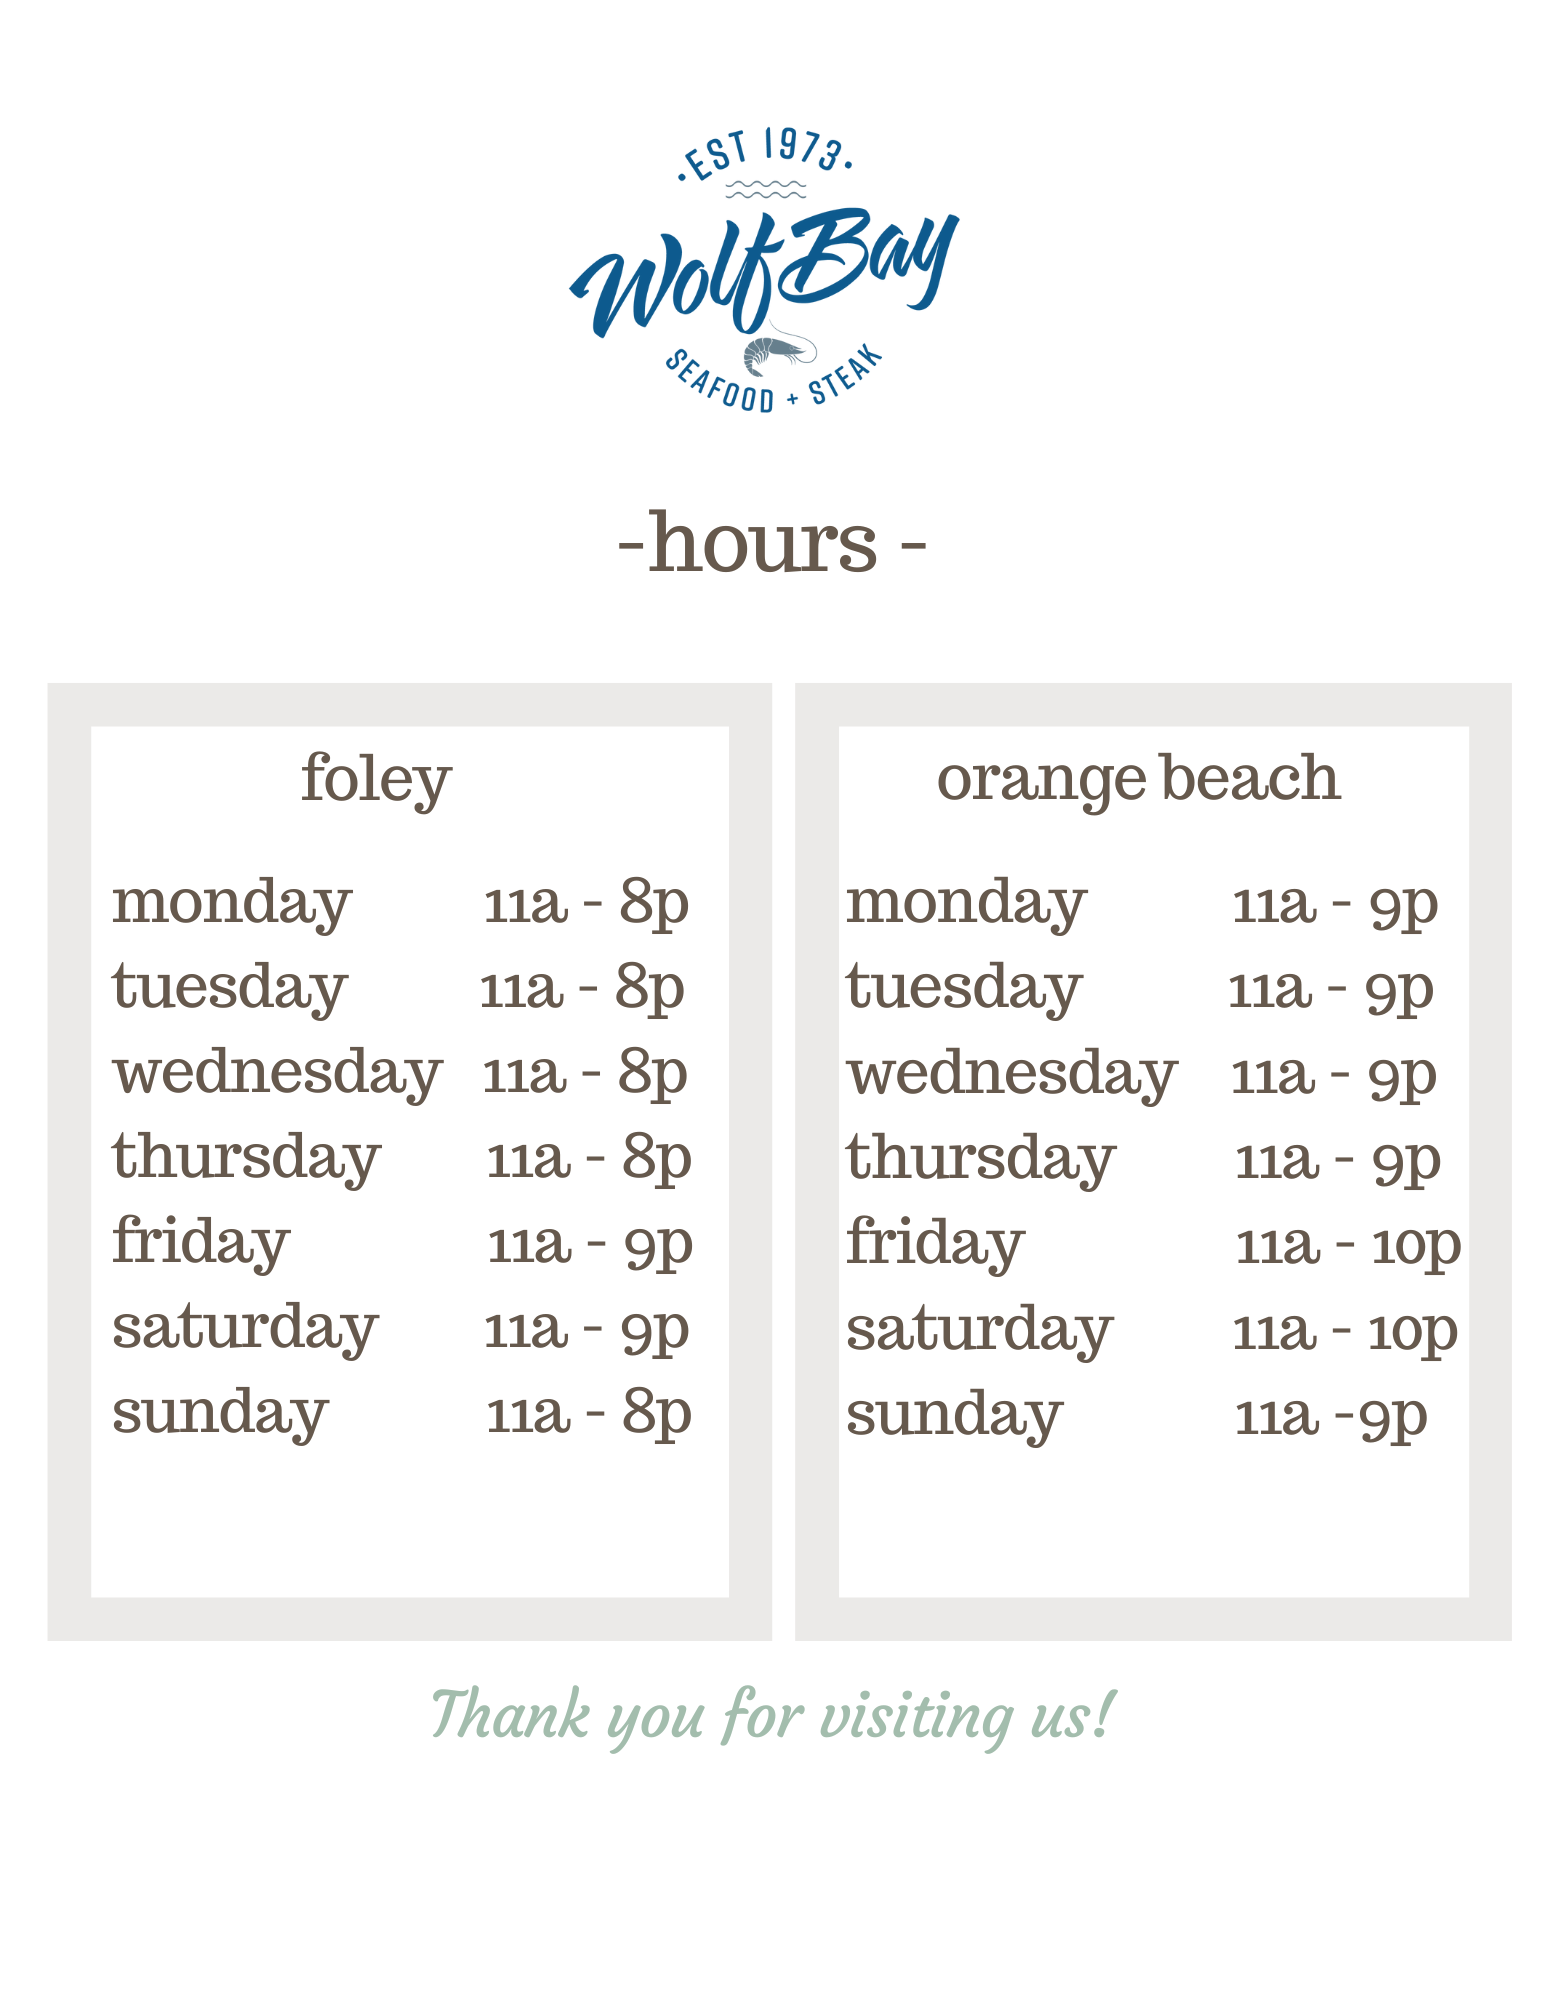 Fall & Winter Hours for Wolf Bay